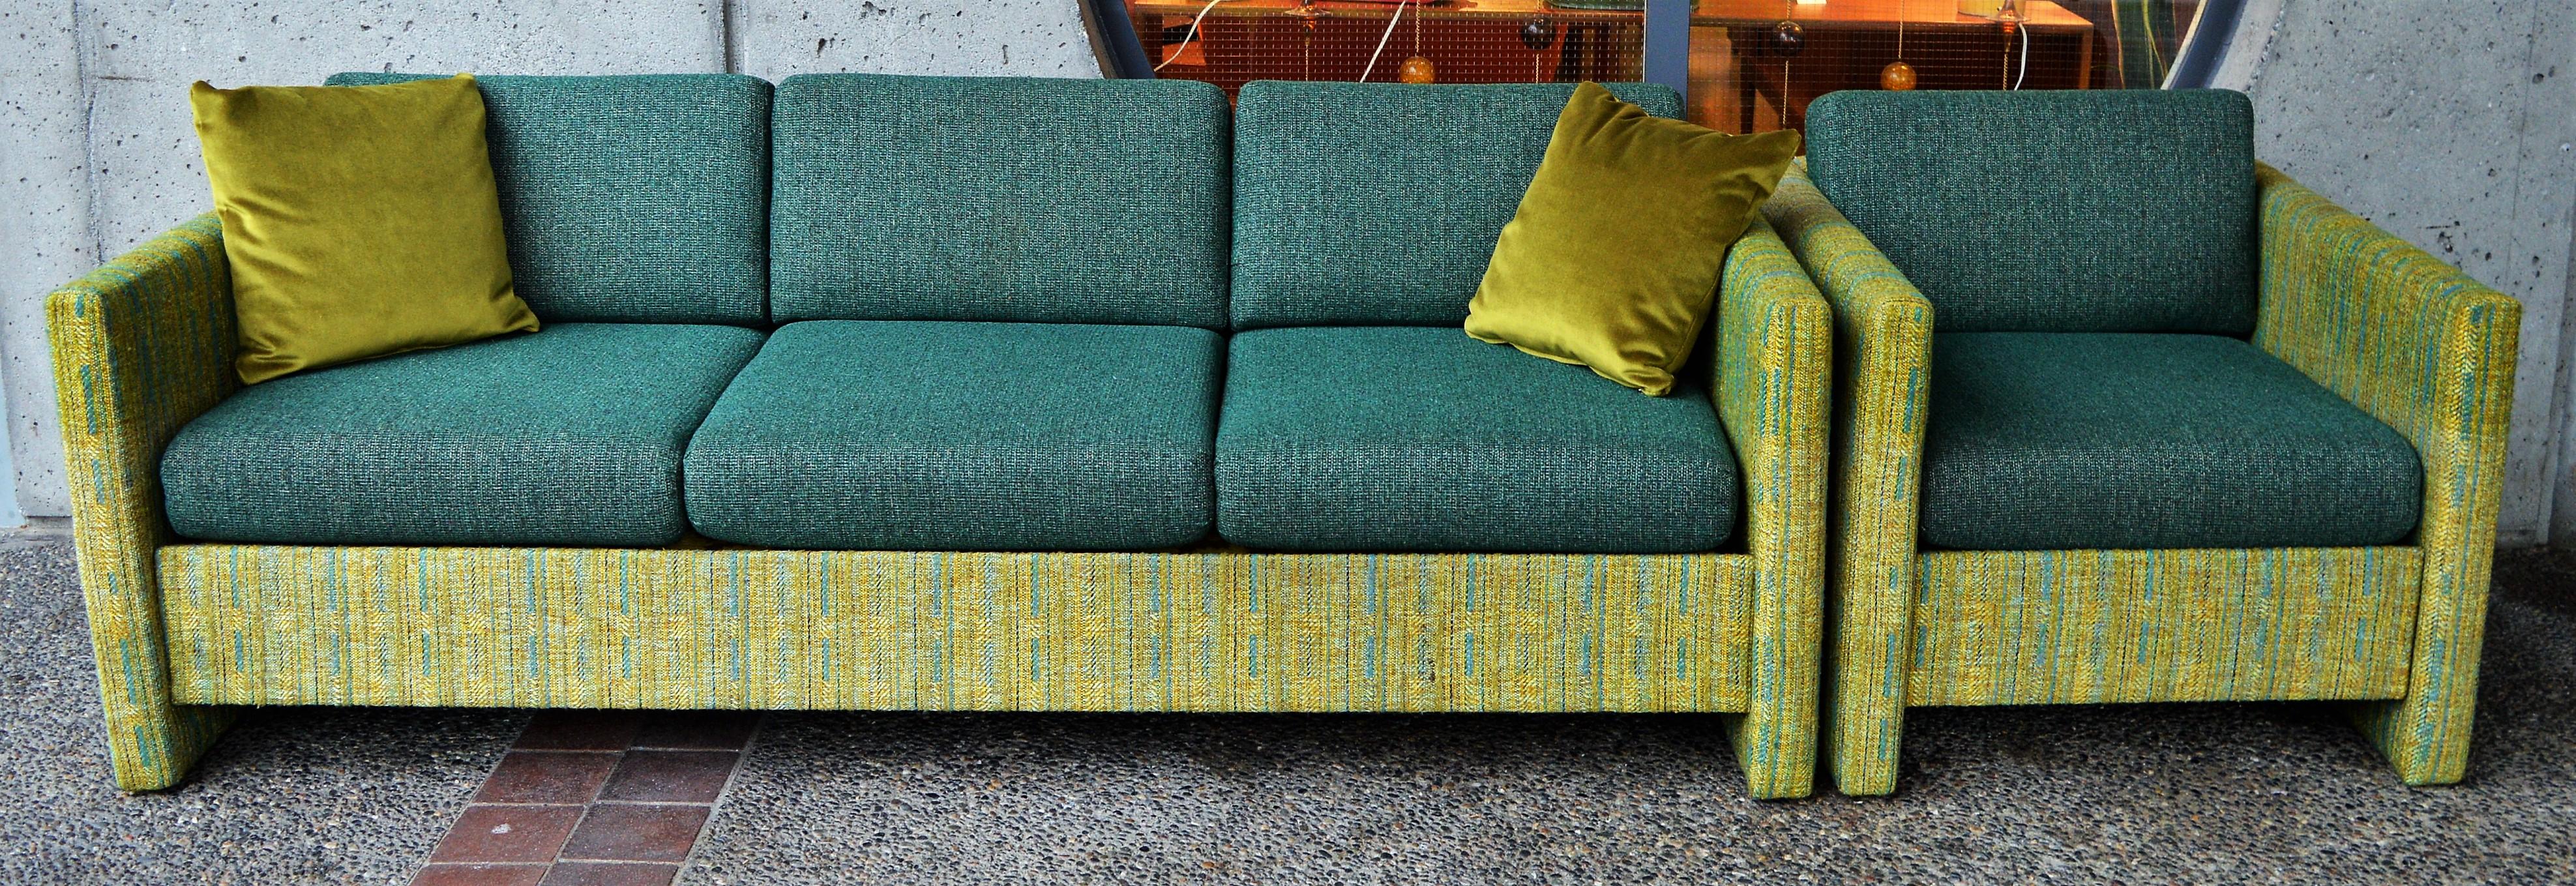 Midcentury Sofa and Club Chair in Teal Wool Cushions with Contrasting Print (Mitte des 20. Jahrhunderts)